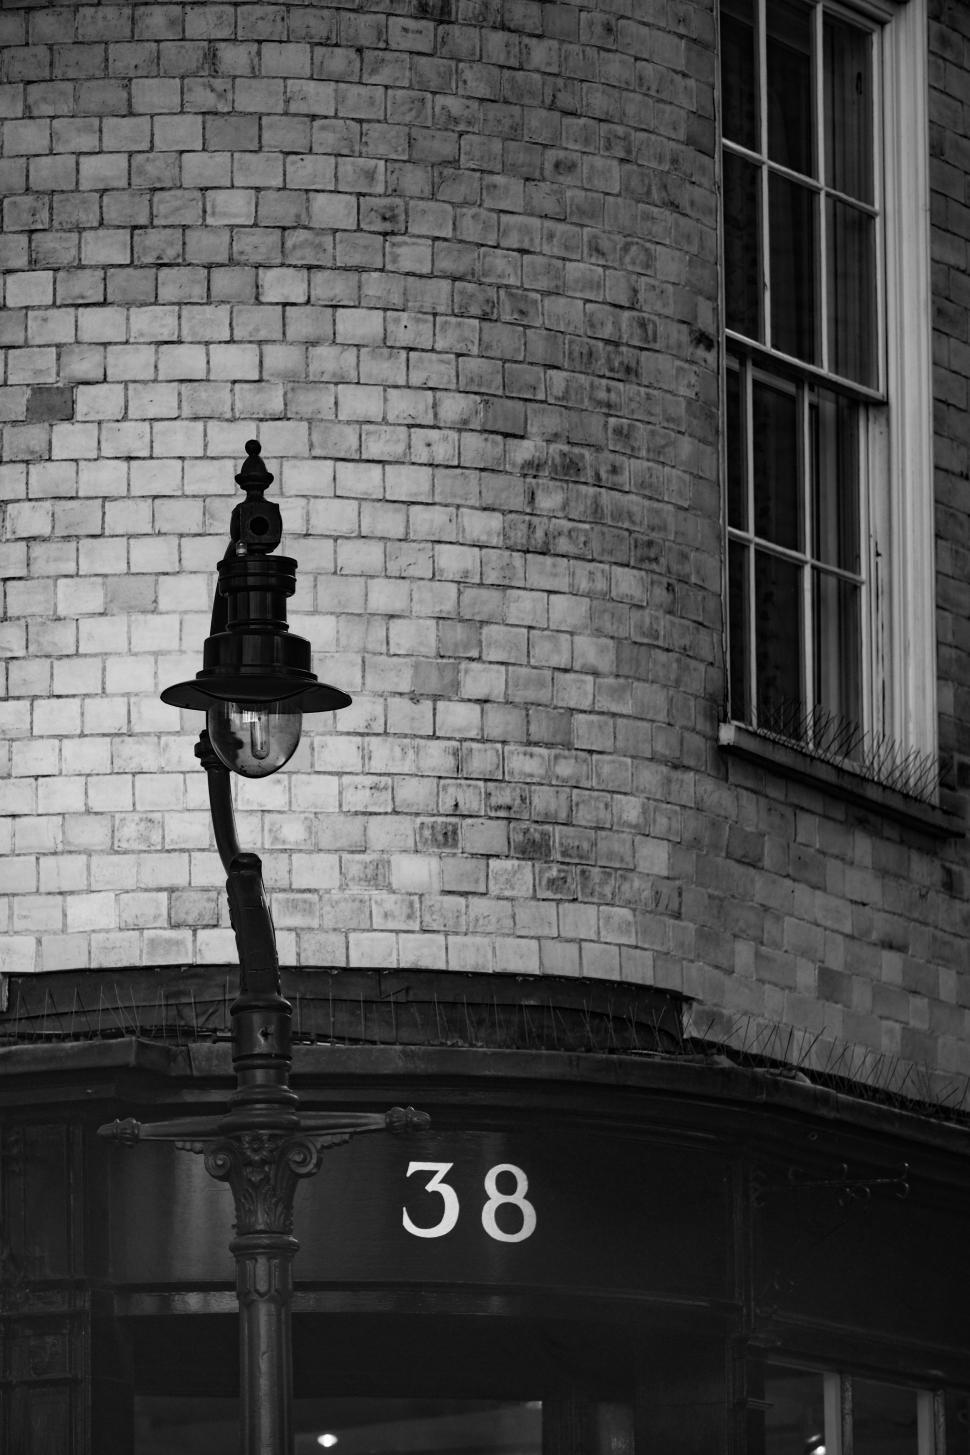 Free Image of Urban Street Light in Black and White 